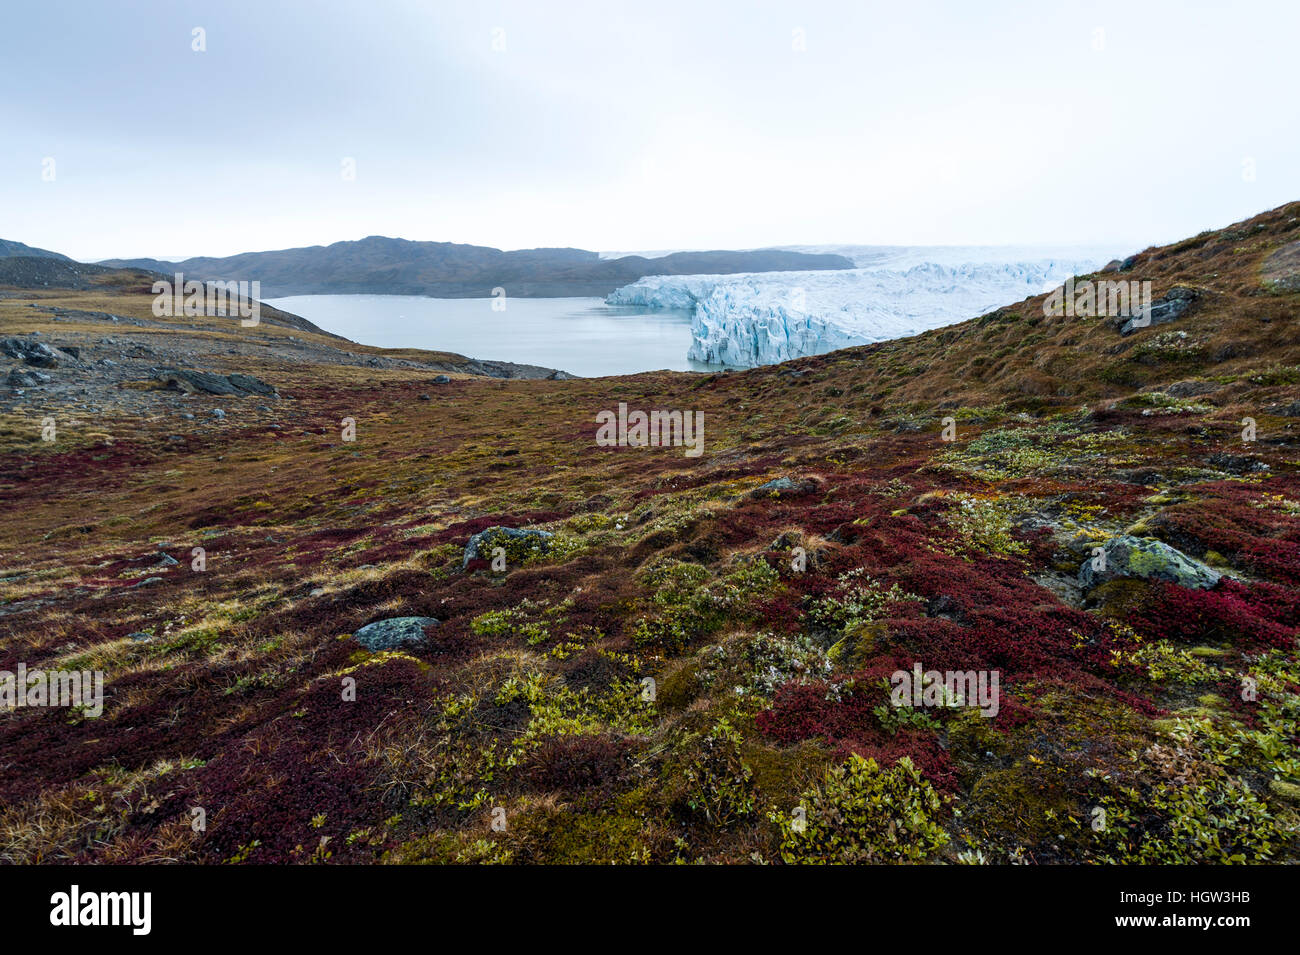 Autumn colours dapple the tundra near a glacier at the end of the brief summer. Stock Photo